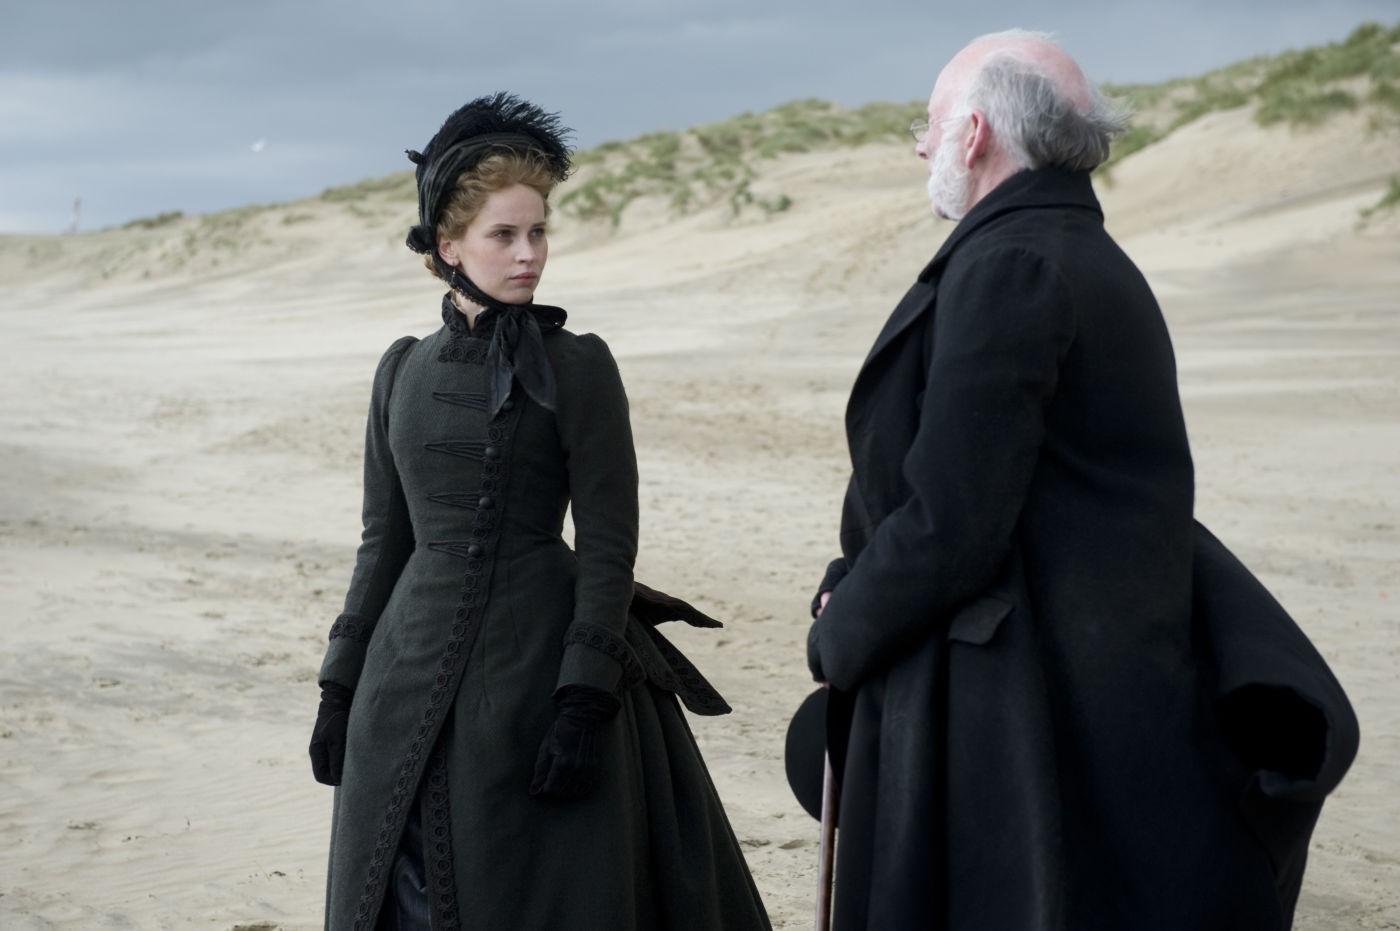 Felicity Jones stars as Nelly Ternan and John Kavanagh stars as Rev. William Benham in Sony Pictures Classics' The Invisible Woman (2013). Photo credit by David Appleby.